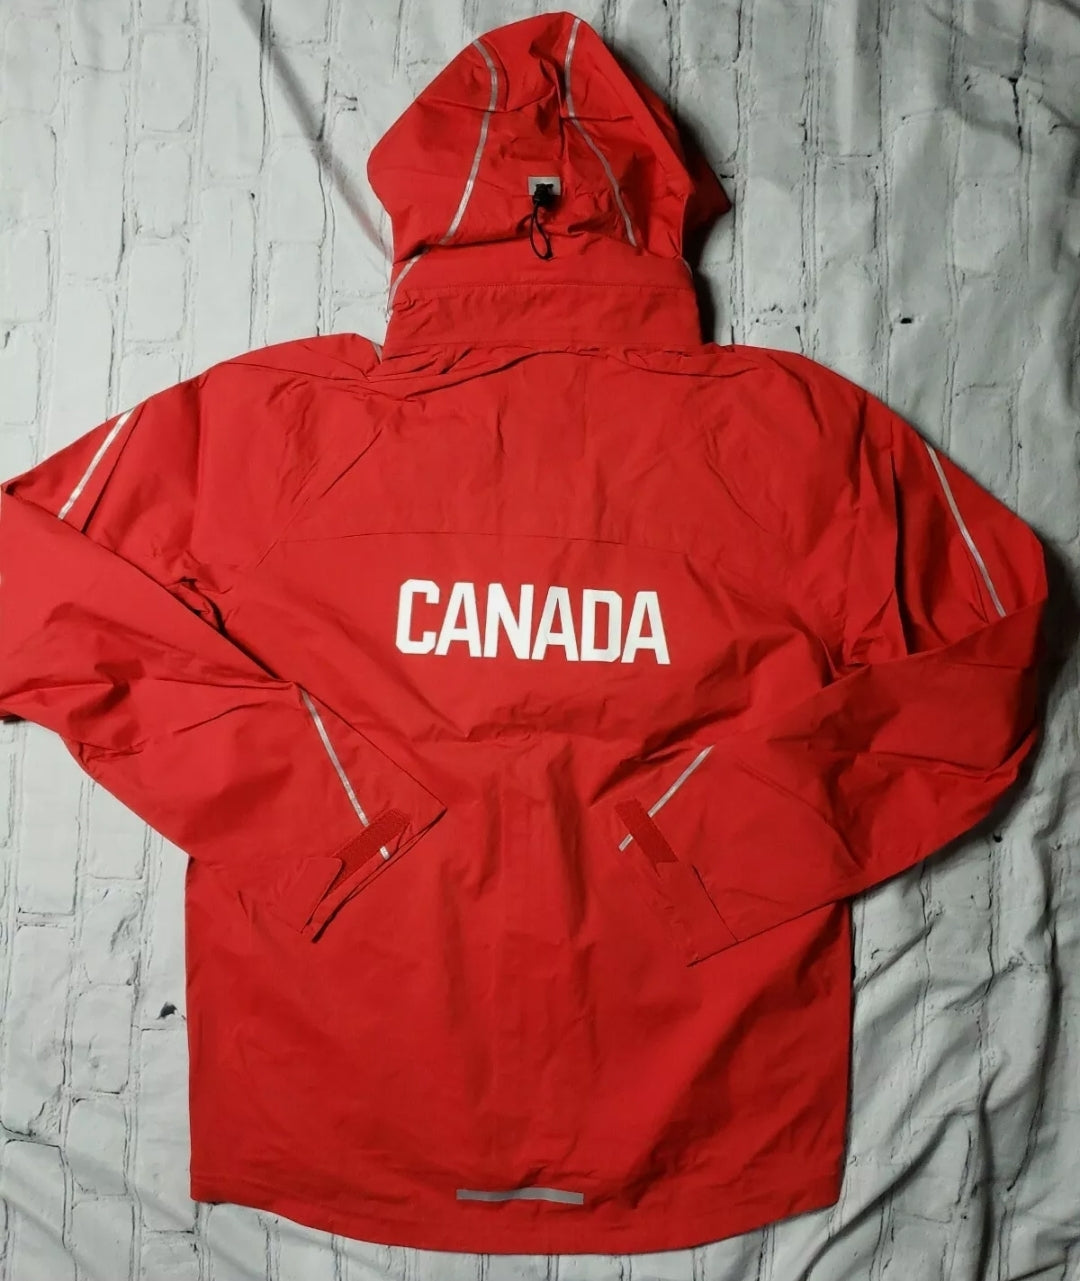 Nike Pro Elite Hypershield Storm Jacket Canada  Mens Size Small Track and Field